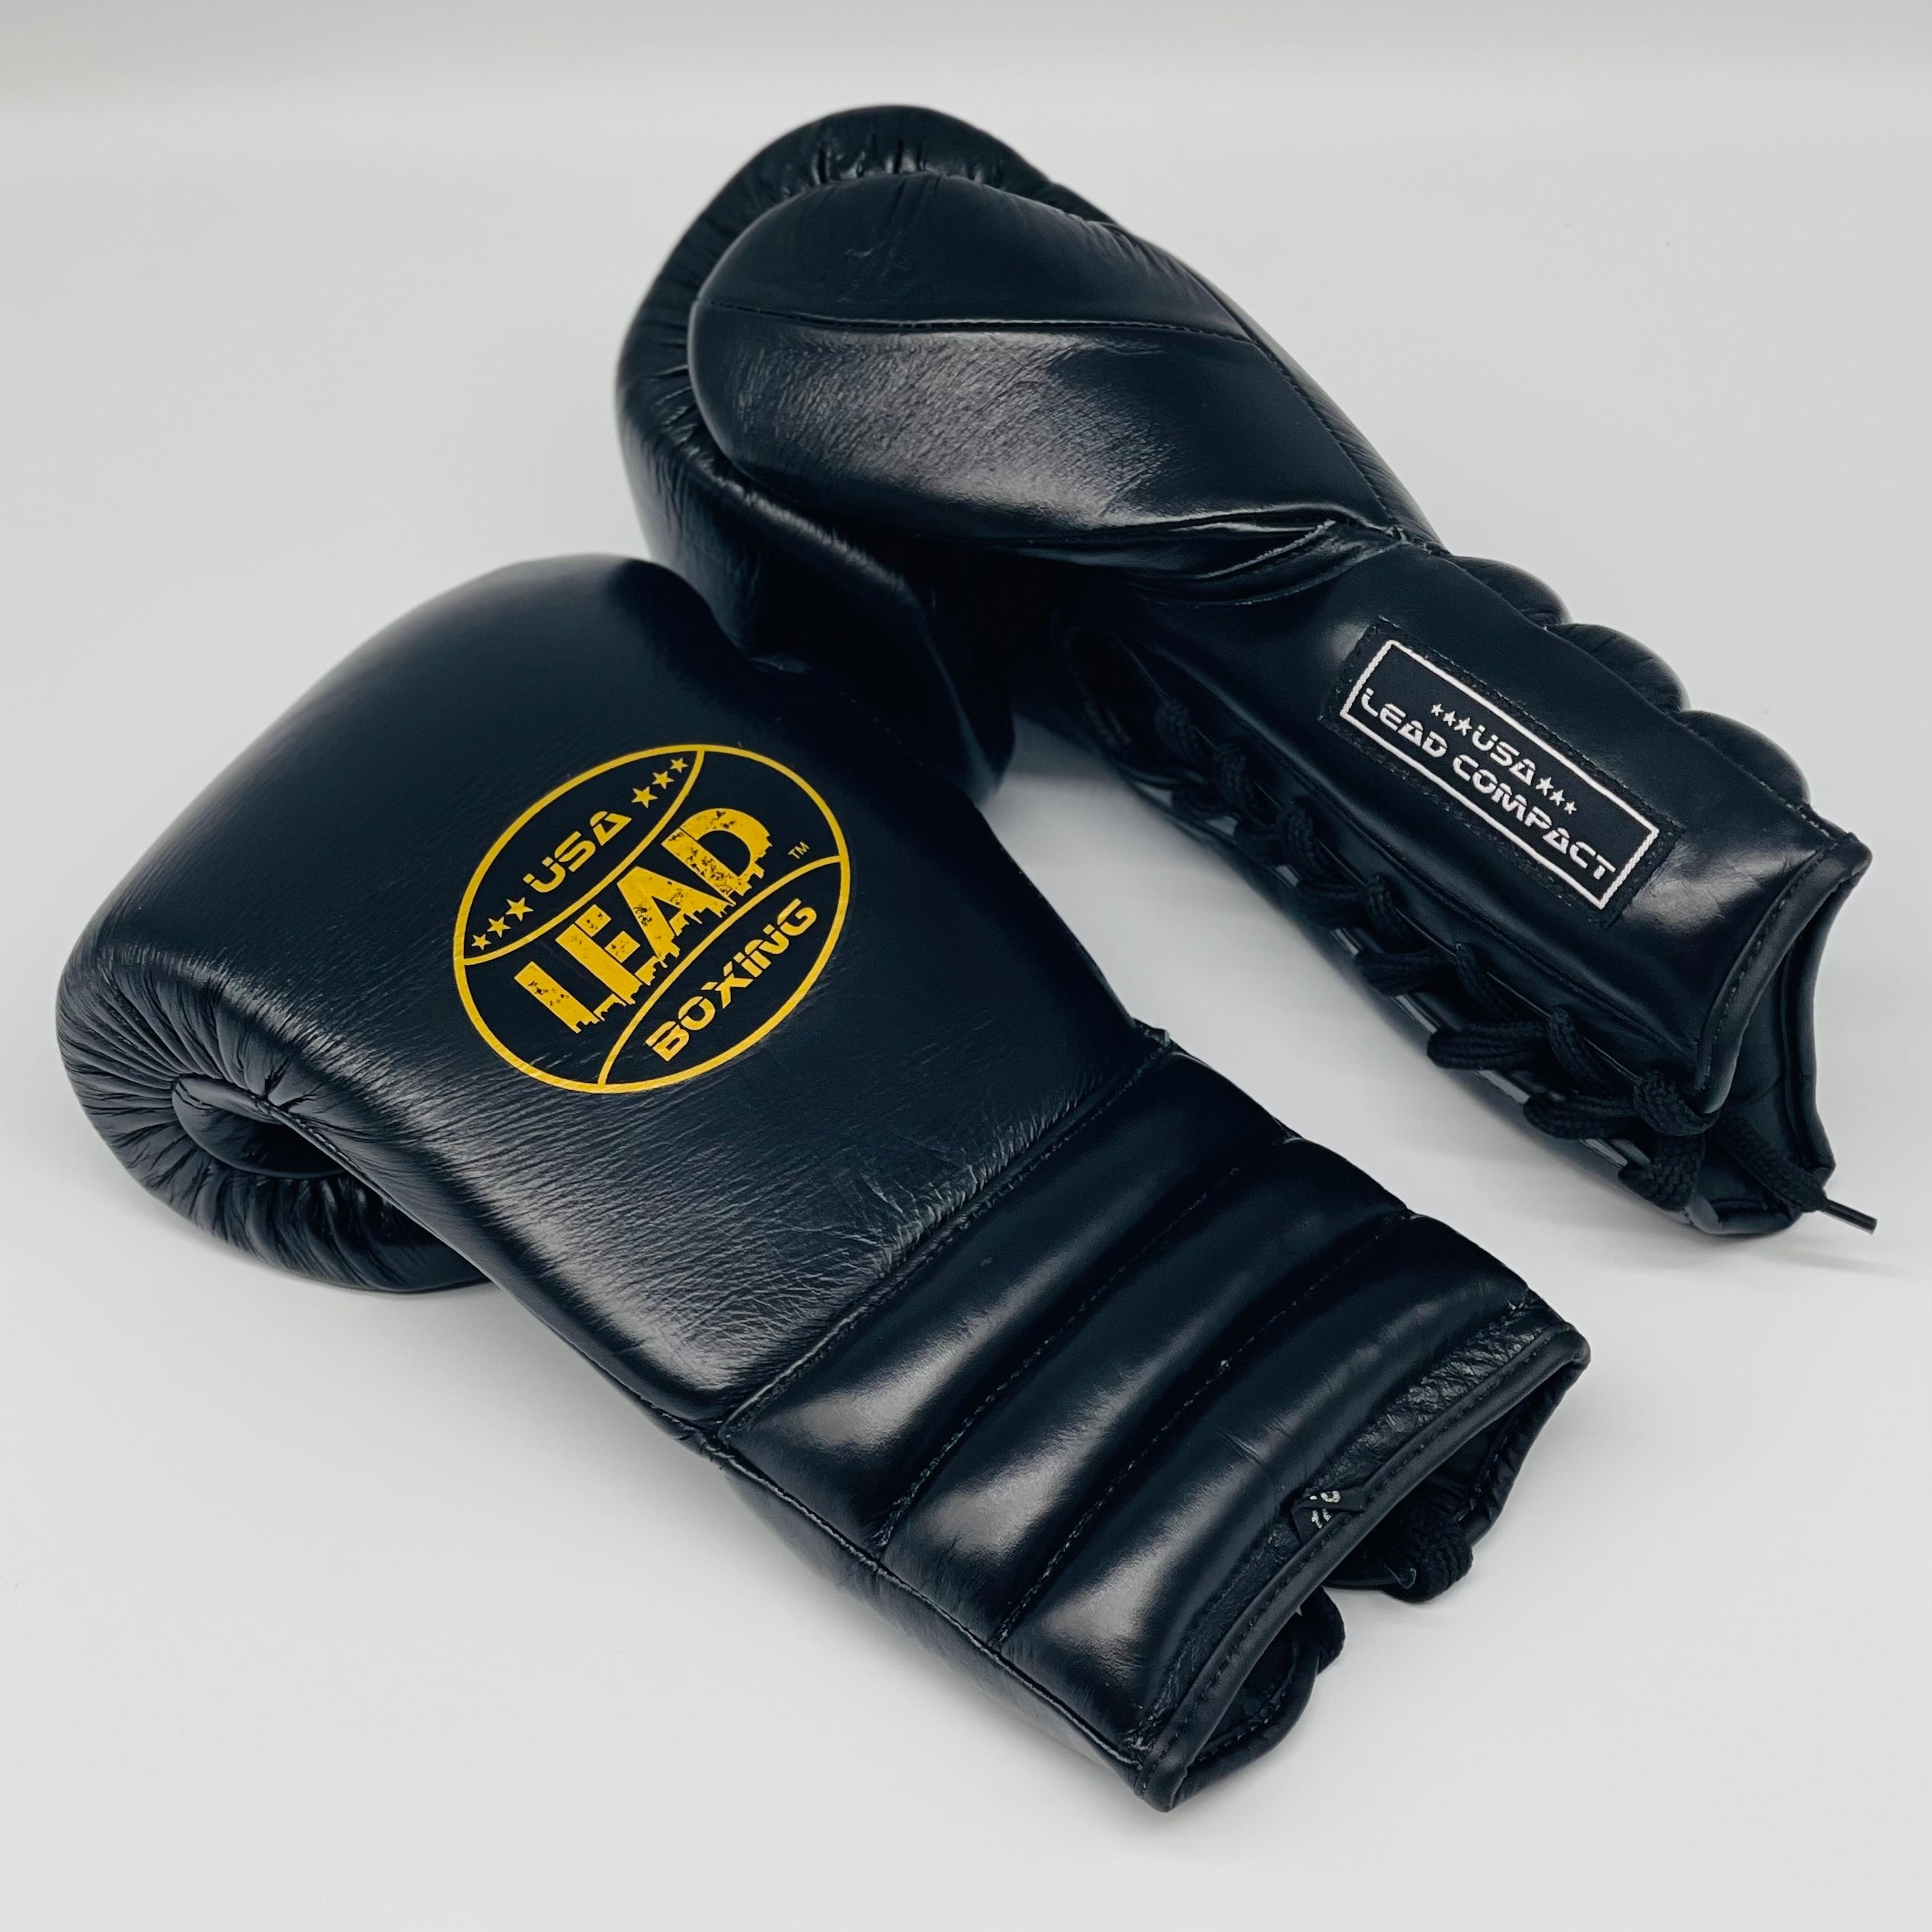 Lead Compact Sparring Gloves (Black-Gold Logo)